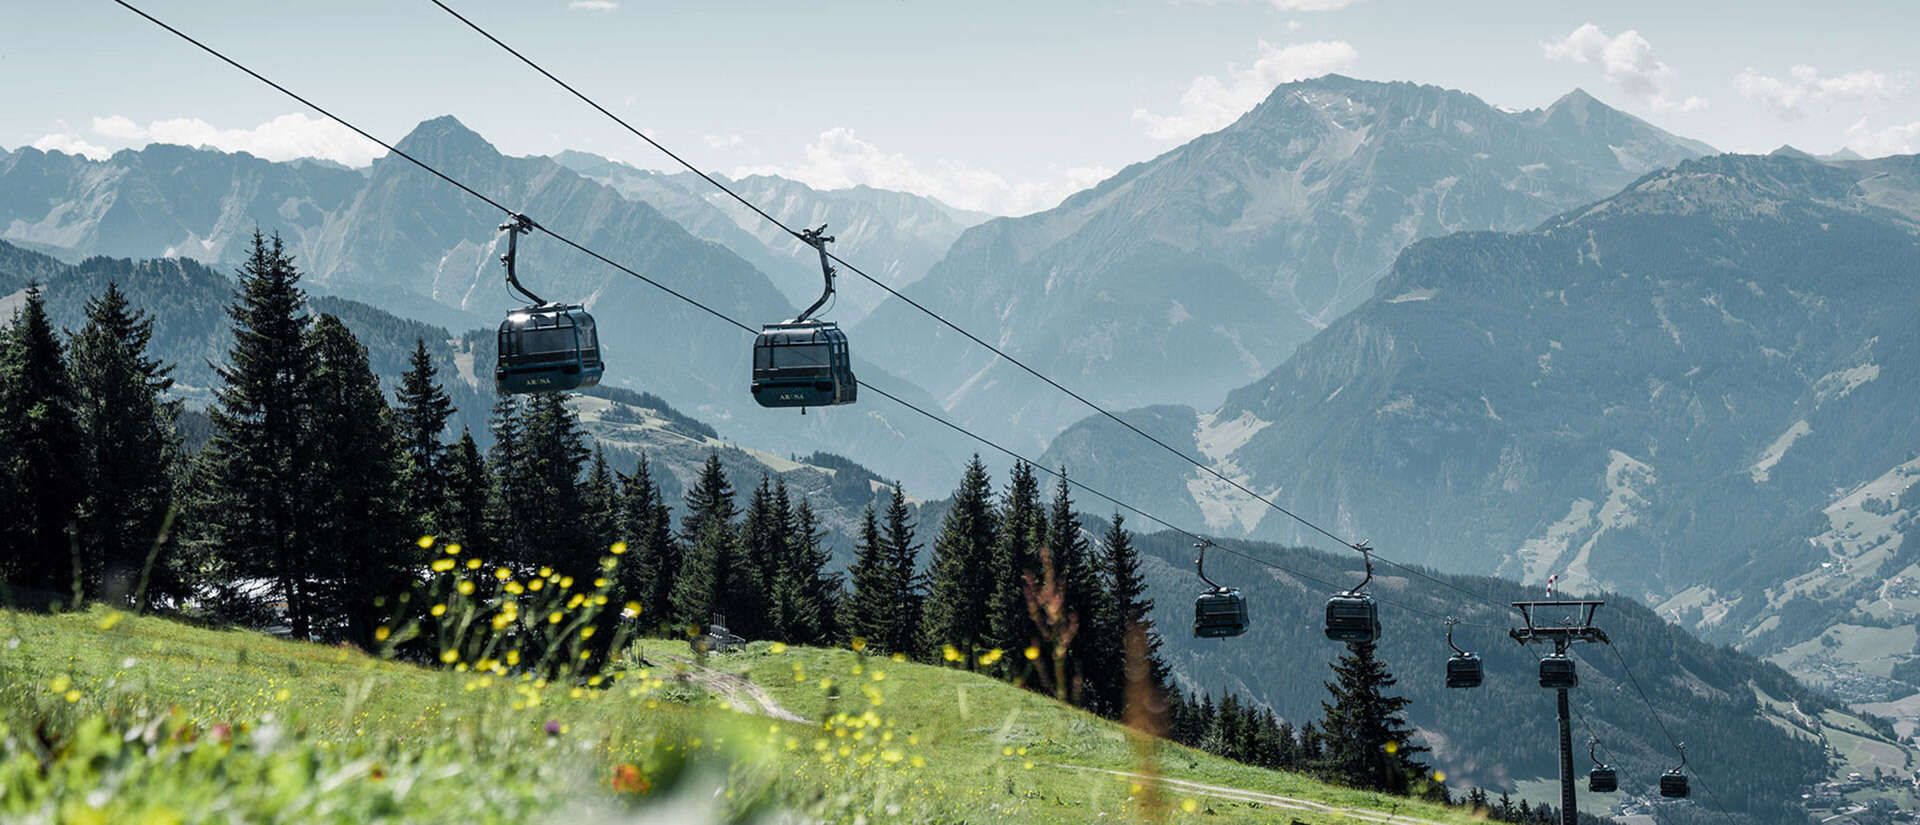 Mountain summer in the Zillertal